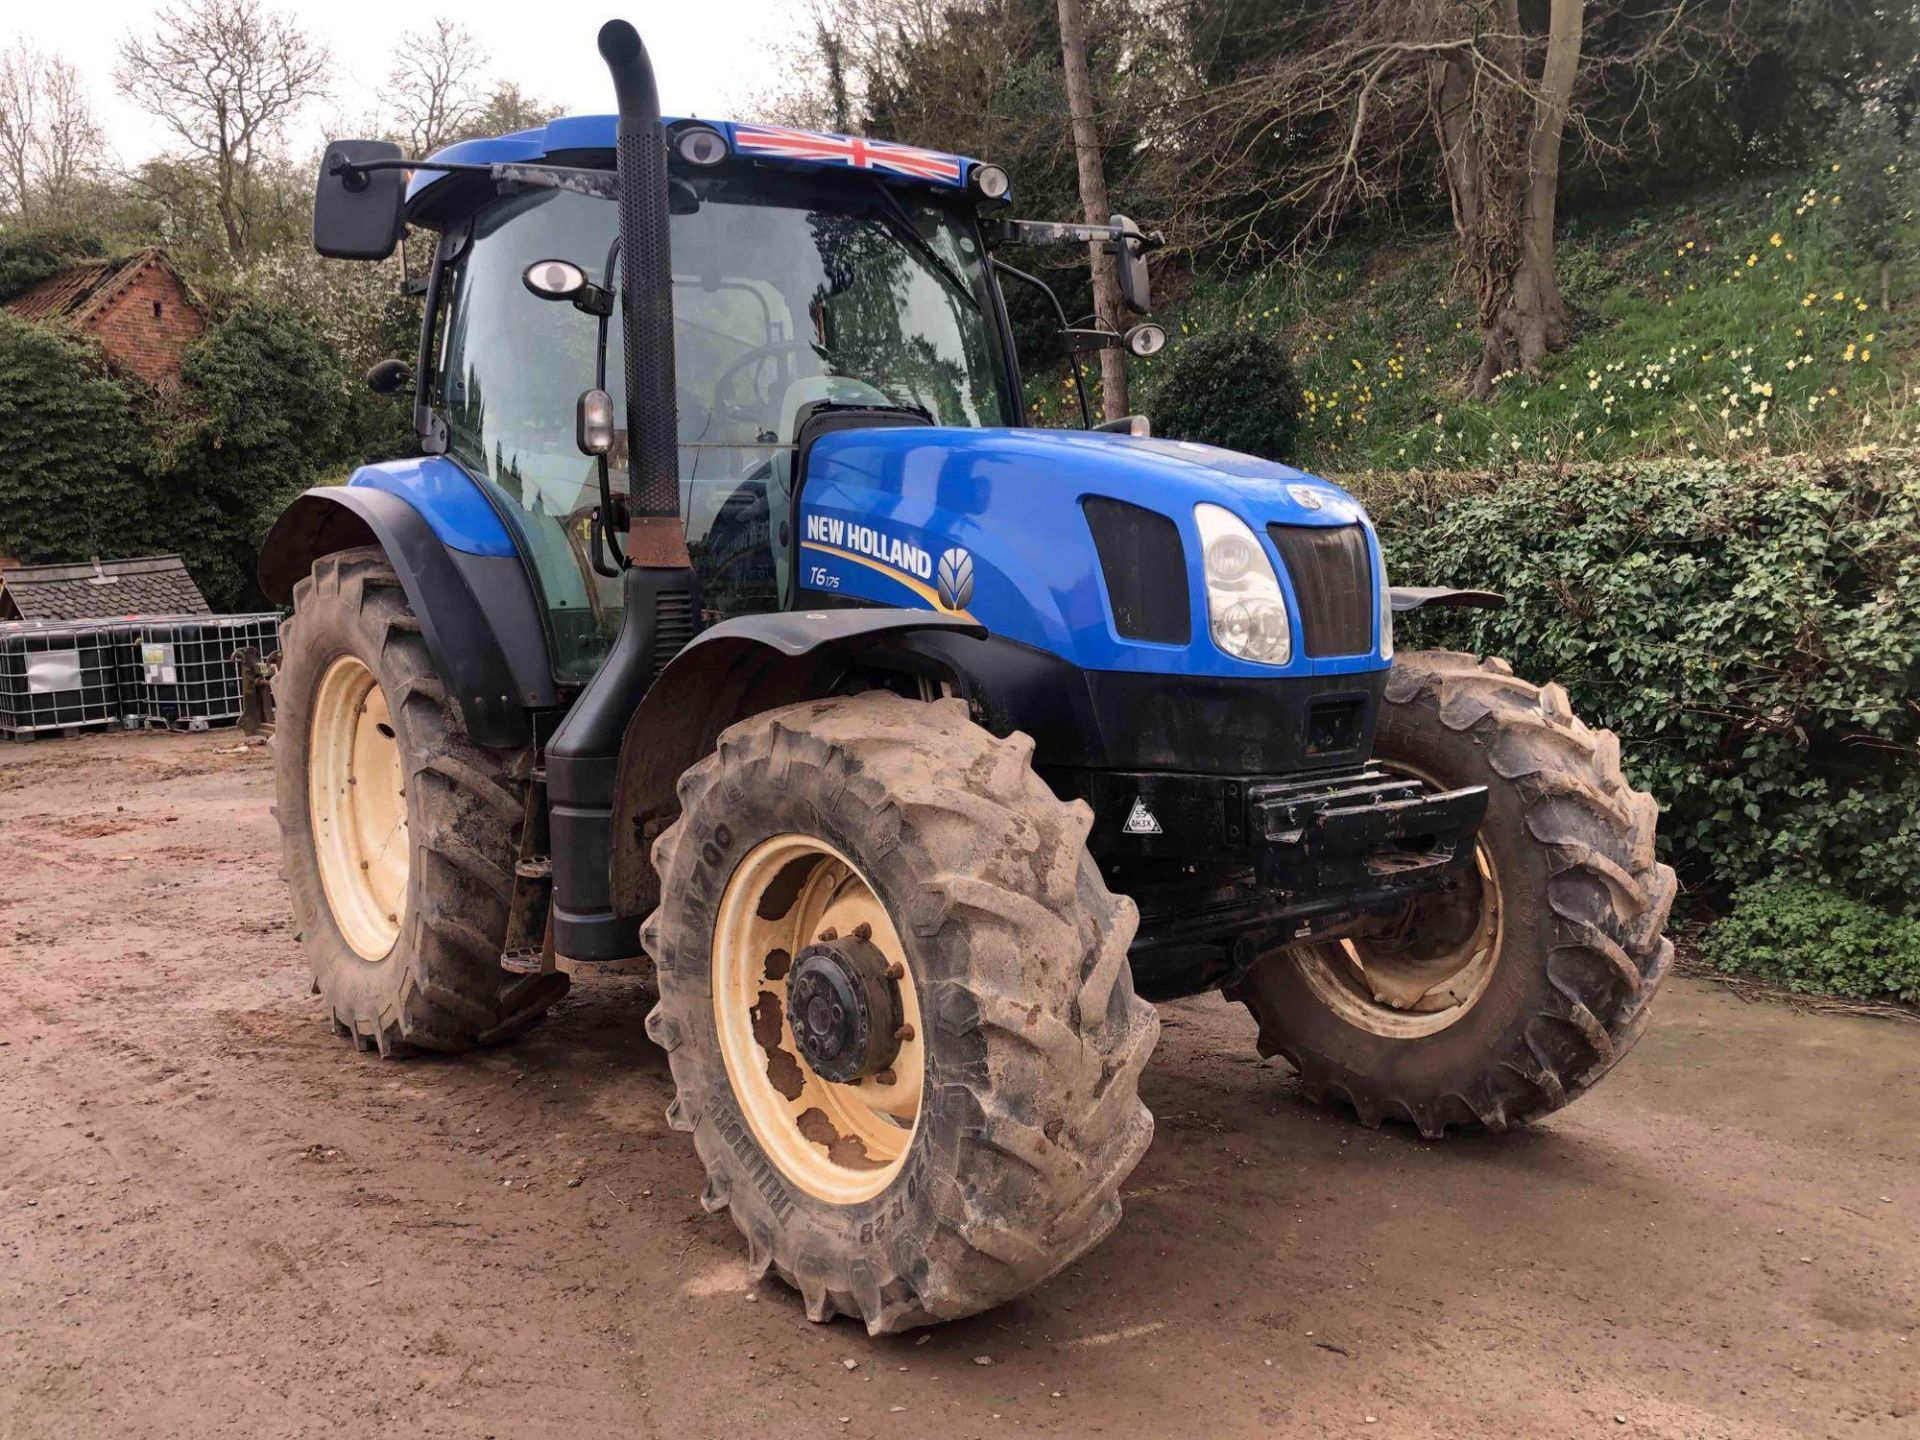 2013 New Holland T6.175 4wd tractor, 3 manual spools, air, on 420/70R28 front and 520/70R38 rear whe - Bild 2 aus 26